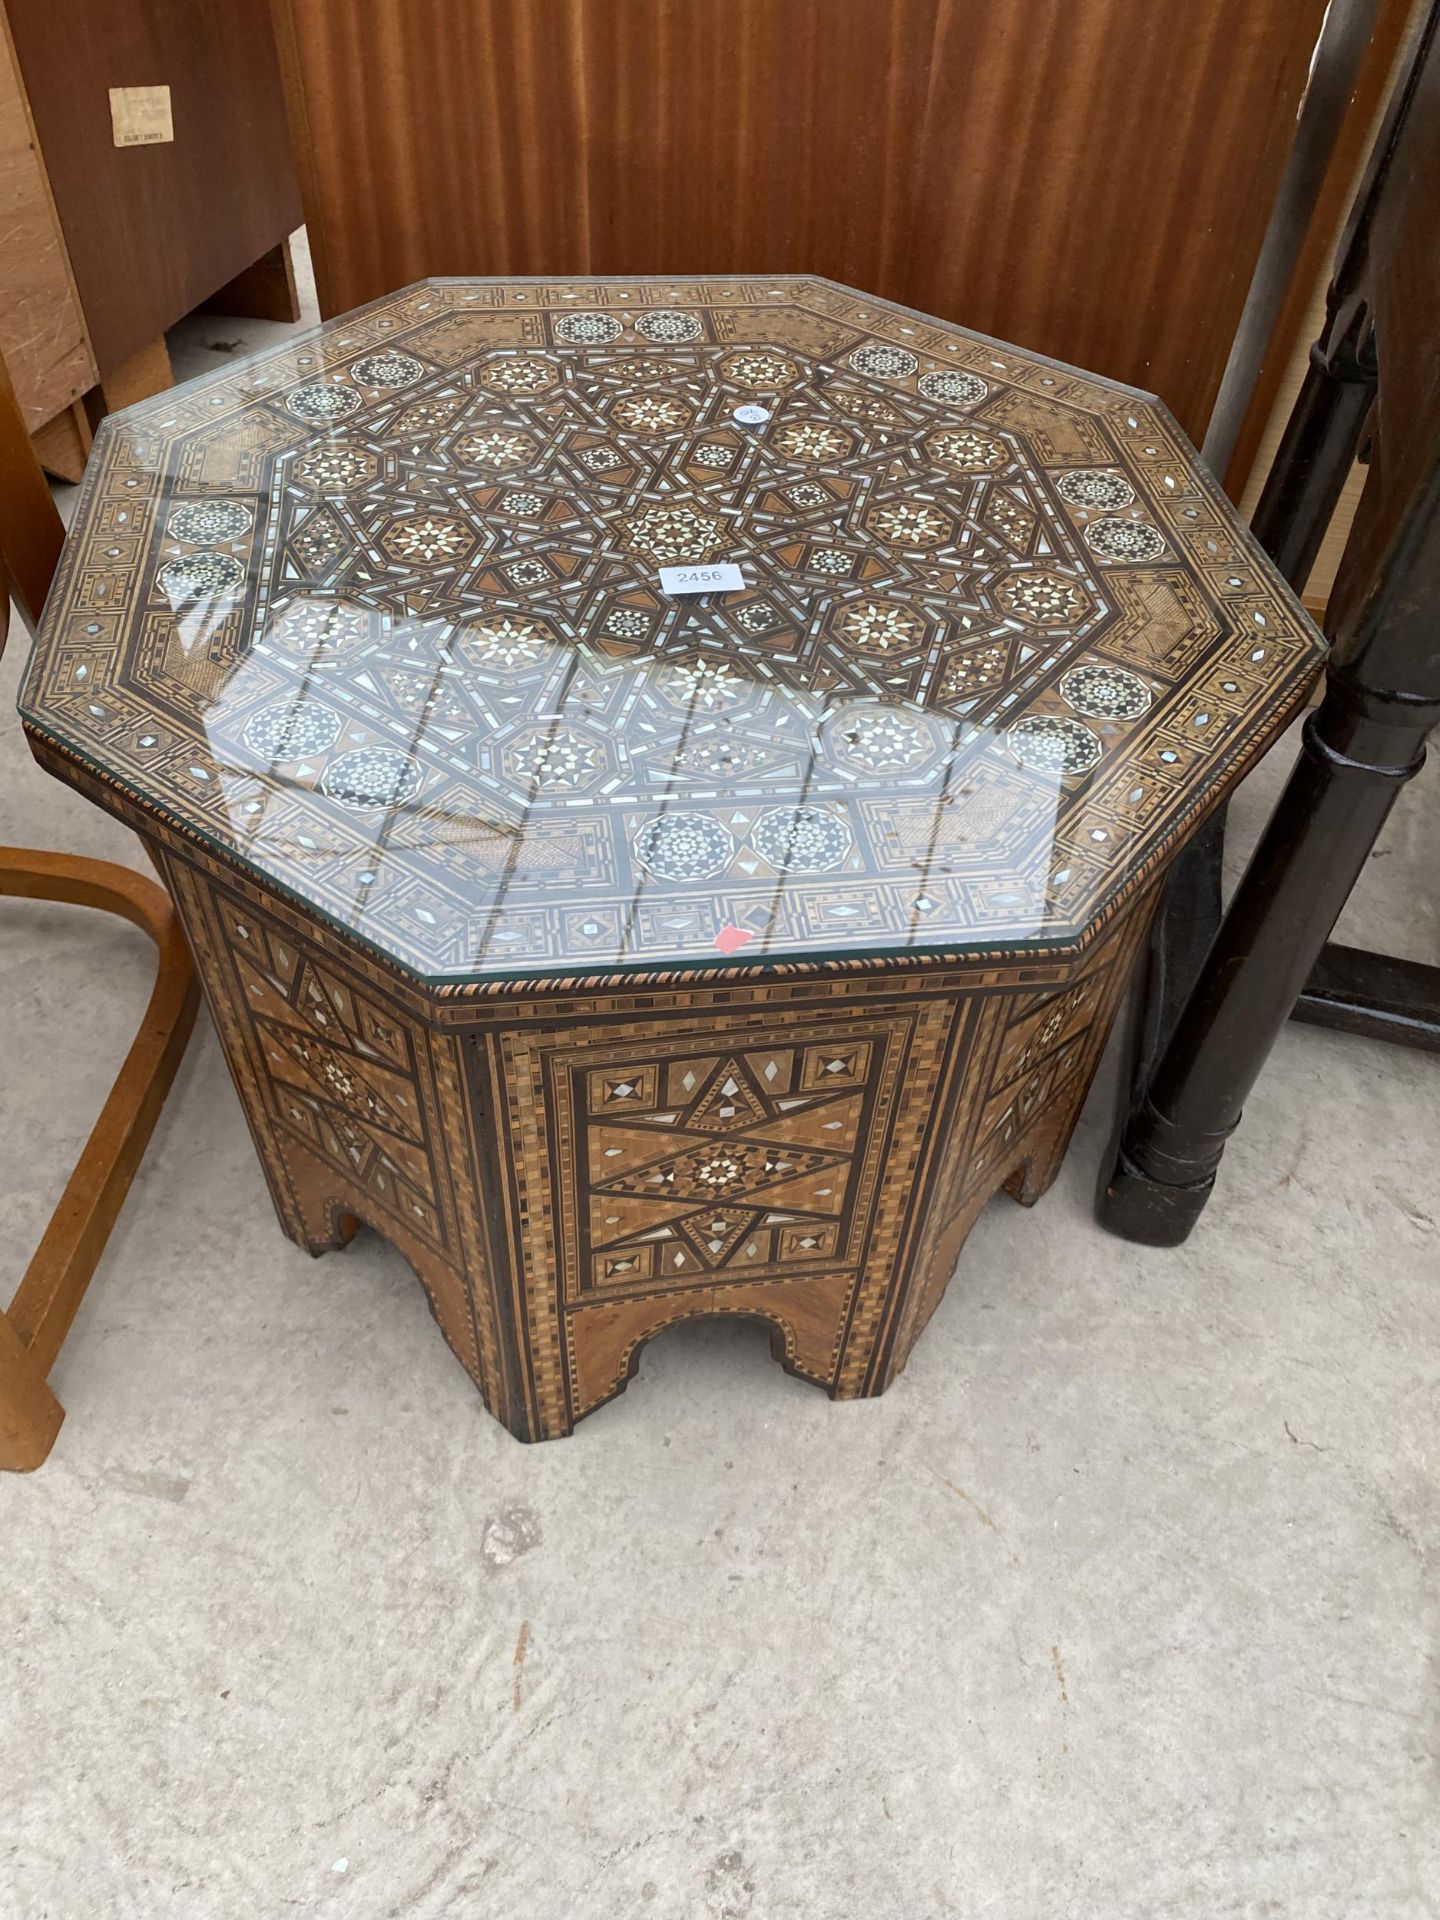 AN OCTAGONAL SYRIAN COFFEE TABLE PROFUSELY INLAID WITH MOTHER OF PEARL BEARING LABEL 'ABOUANI